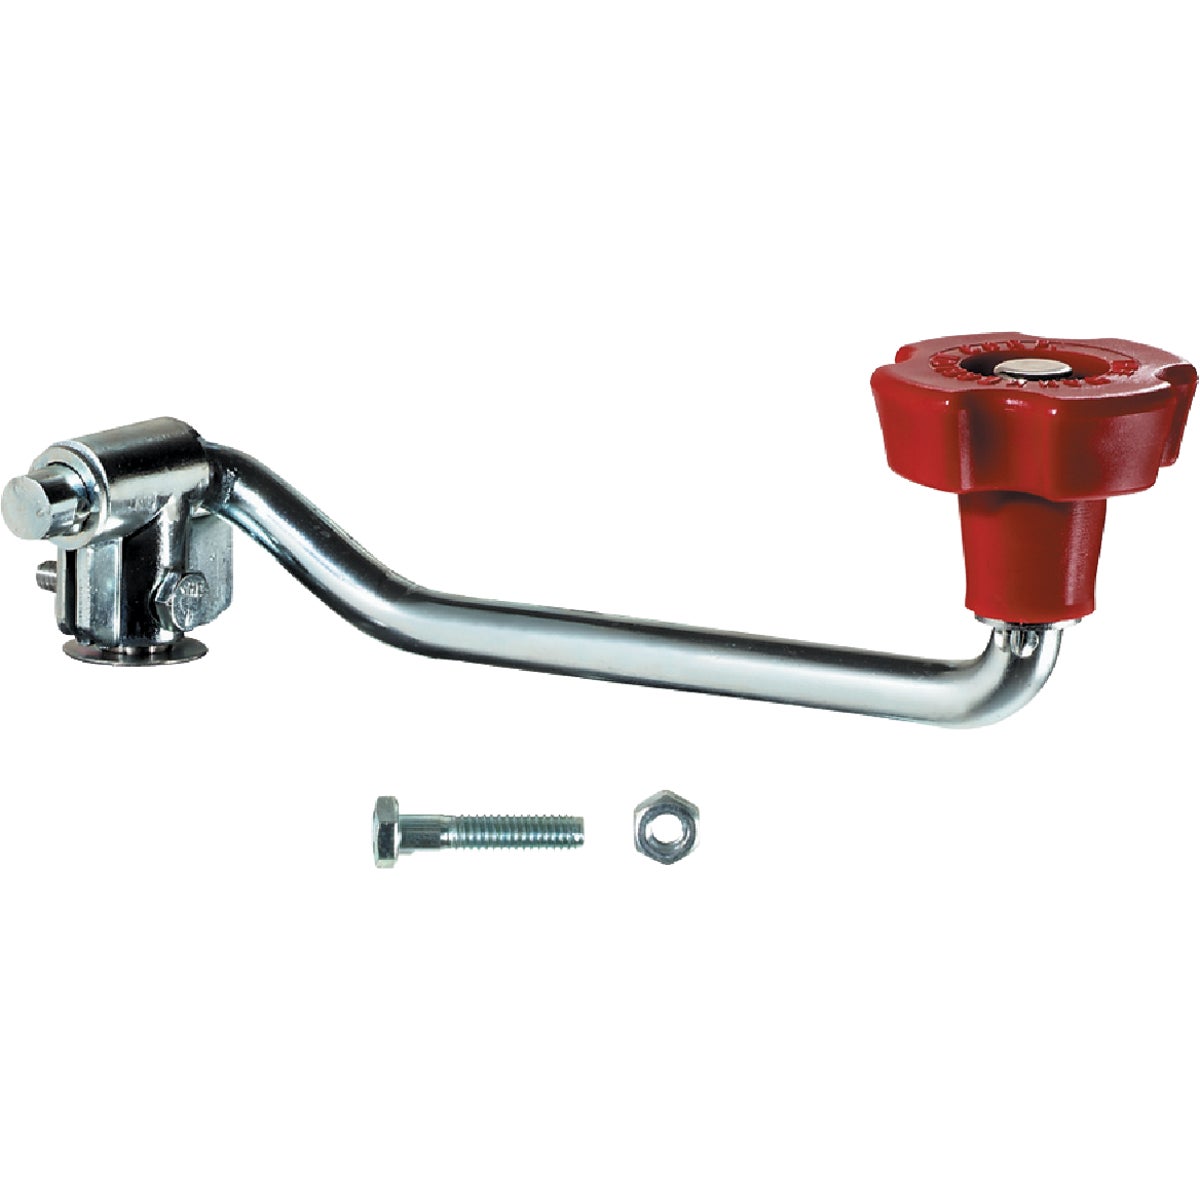 Item 583049, The BULLDOG top wind trailer jack crank handle is designed for use with 